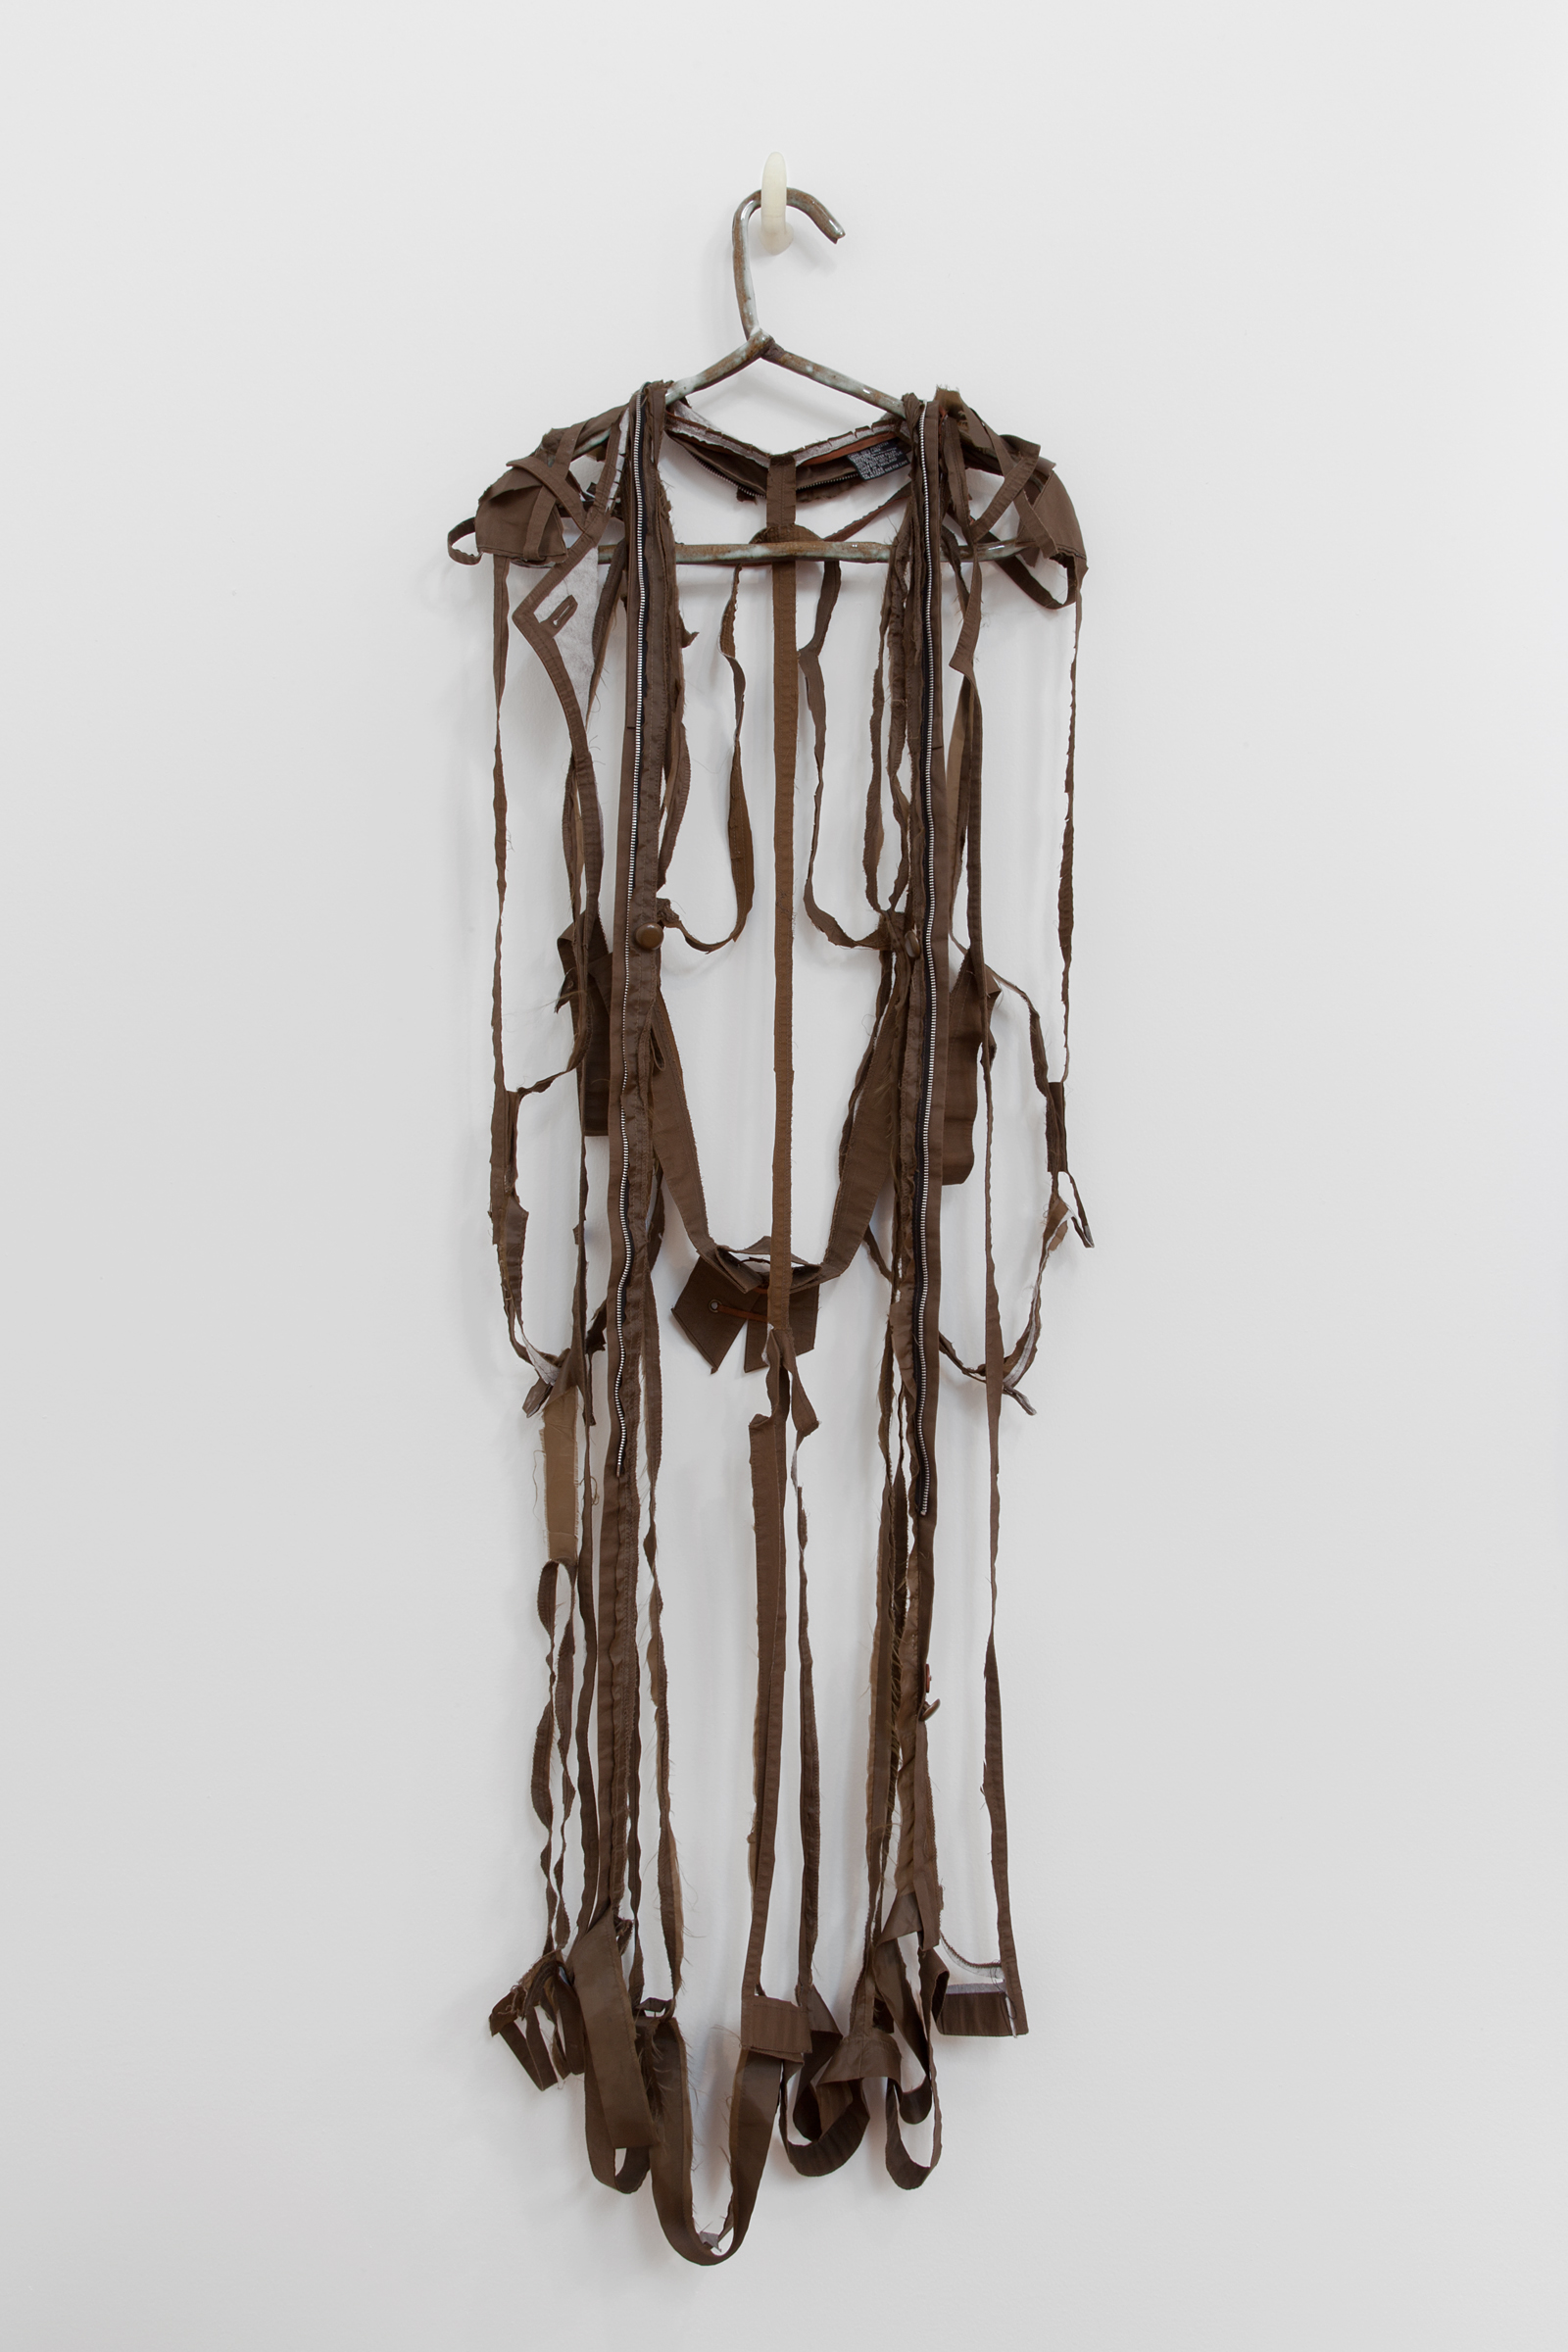   ANNA SEW HOY   chocolate/chocolat , fired stoneware, trench coat and resin finger hook, 58.5" x 18" x 3.5", 2012 